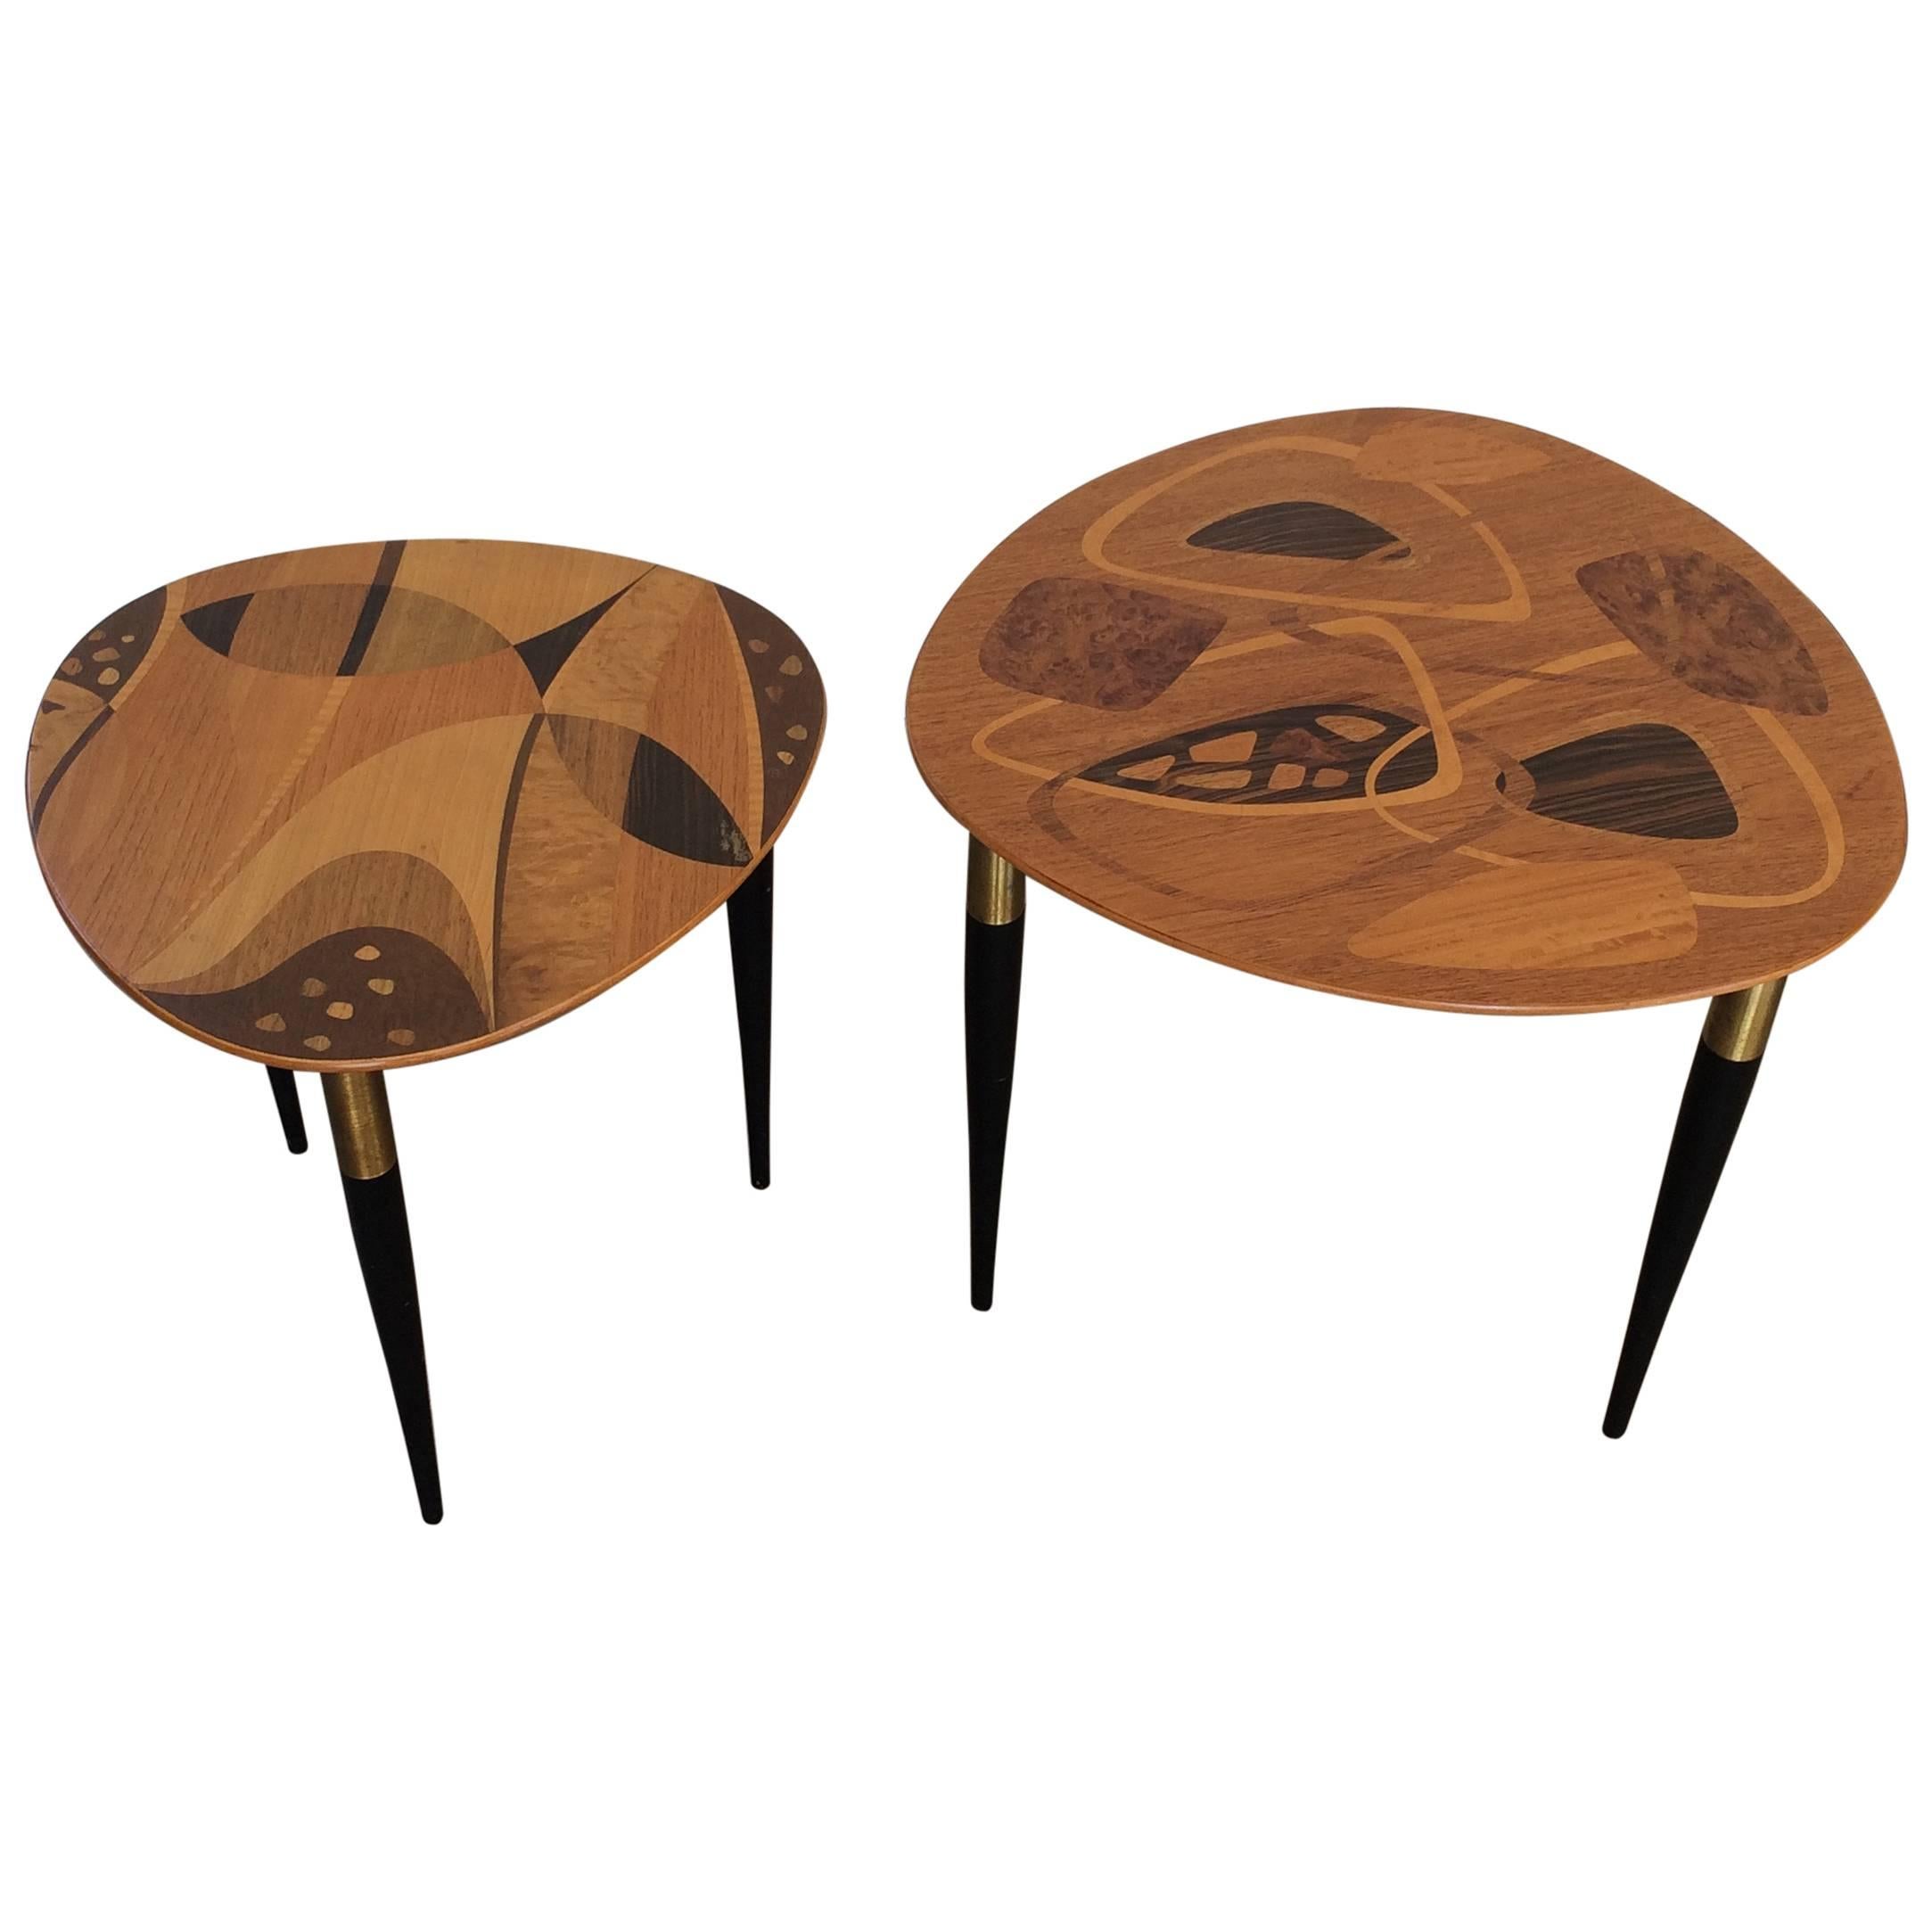 Exotic Wood Inlay Tables with Abstract Designs by Erno Fabry, Sweden, 1953